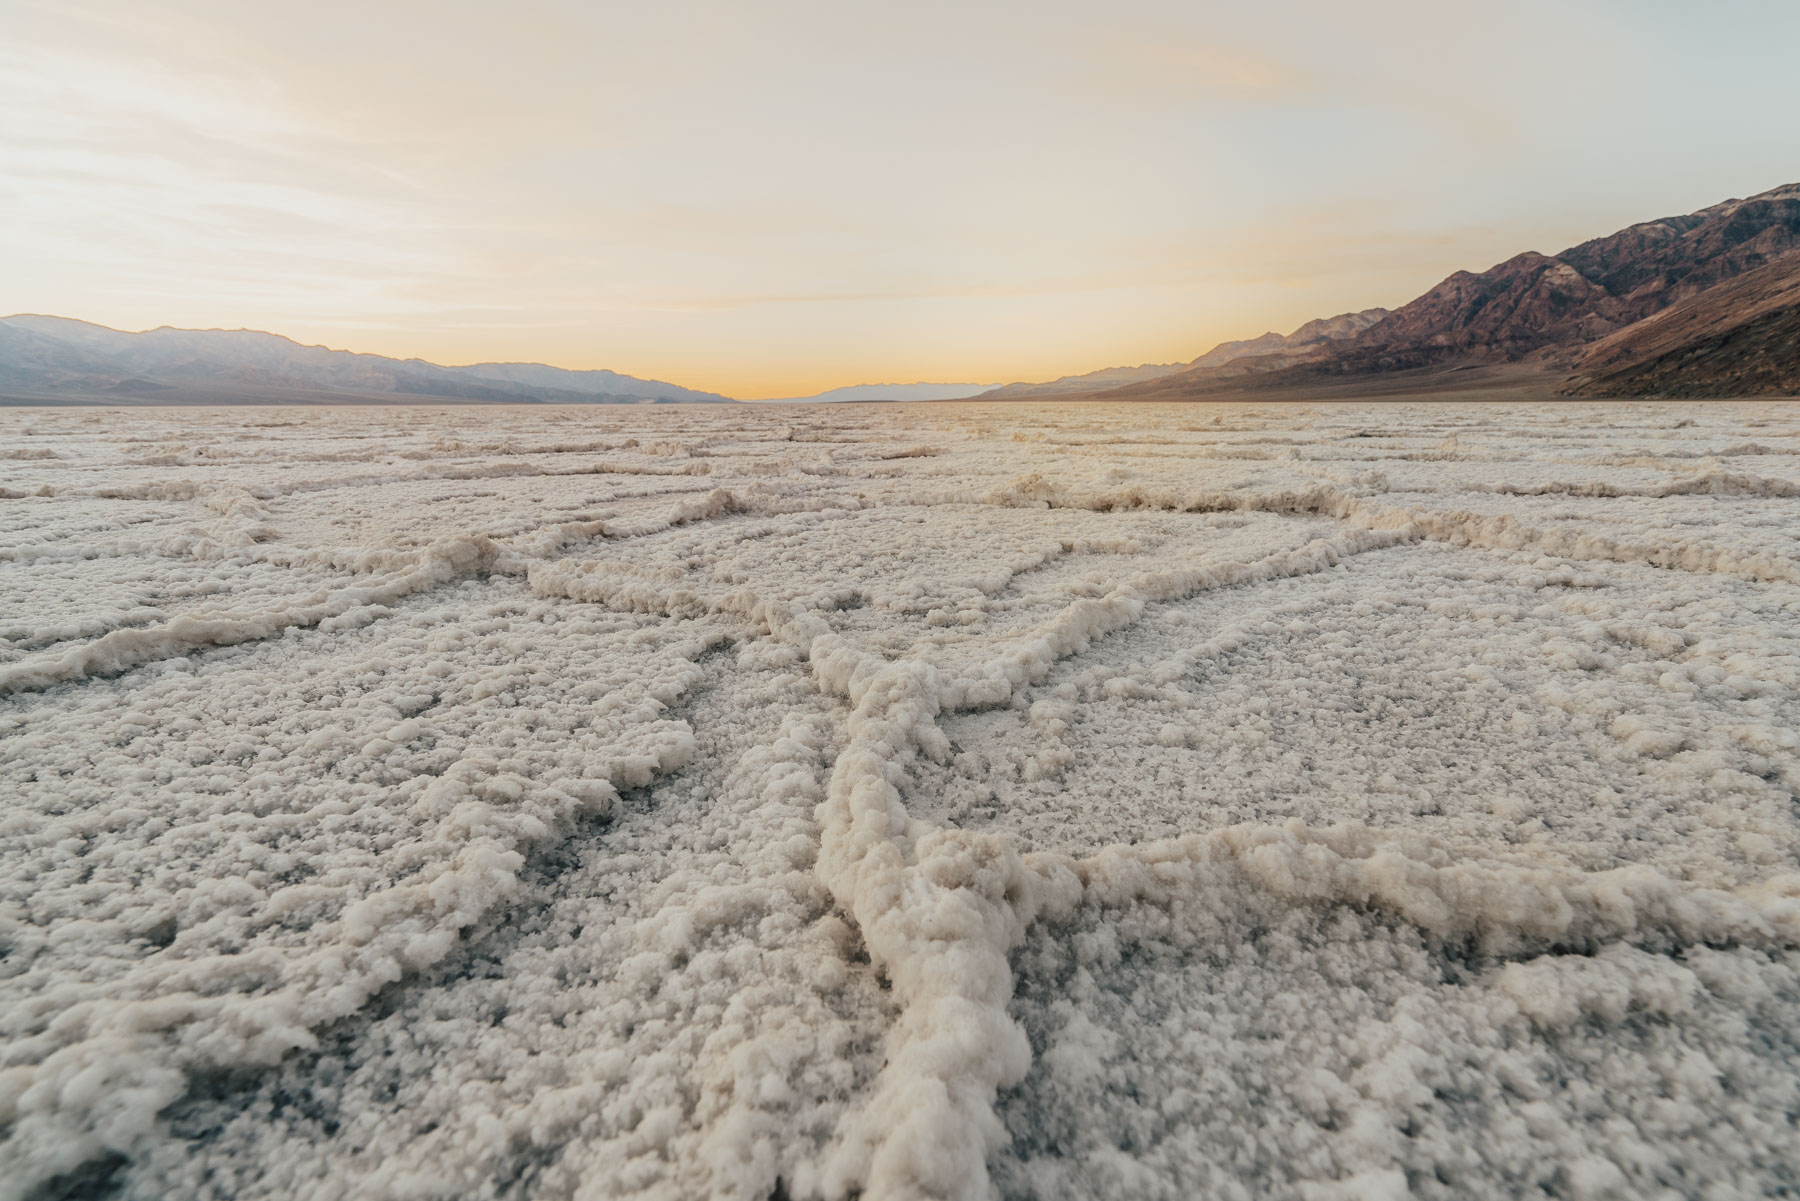 Badwater Baisn in Death Valley National Park